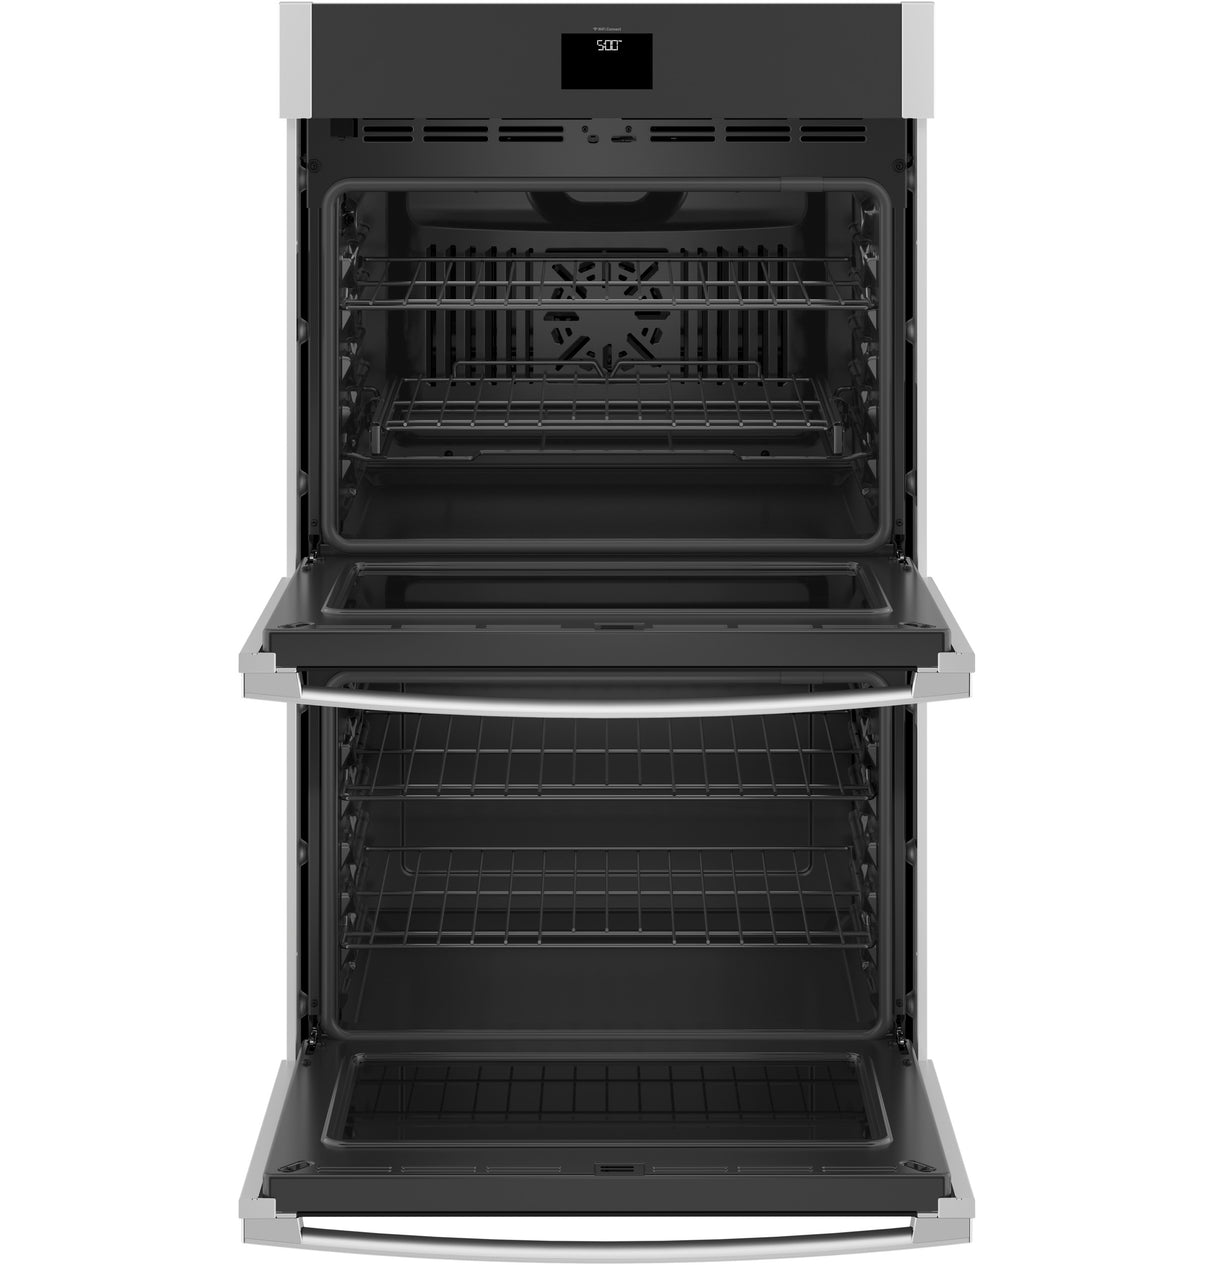 GE(R) 30" Smart Built-In Self-Clean Convection Double Wall Oven with Never Scrub Racks - (JTD5000SNSS)